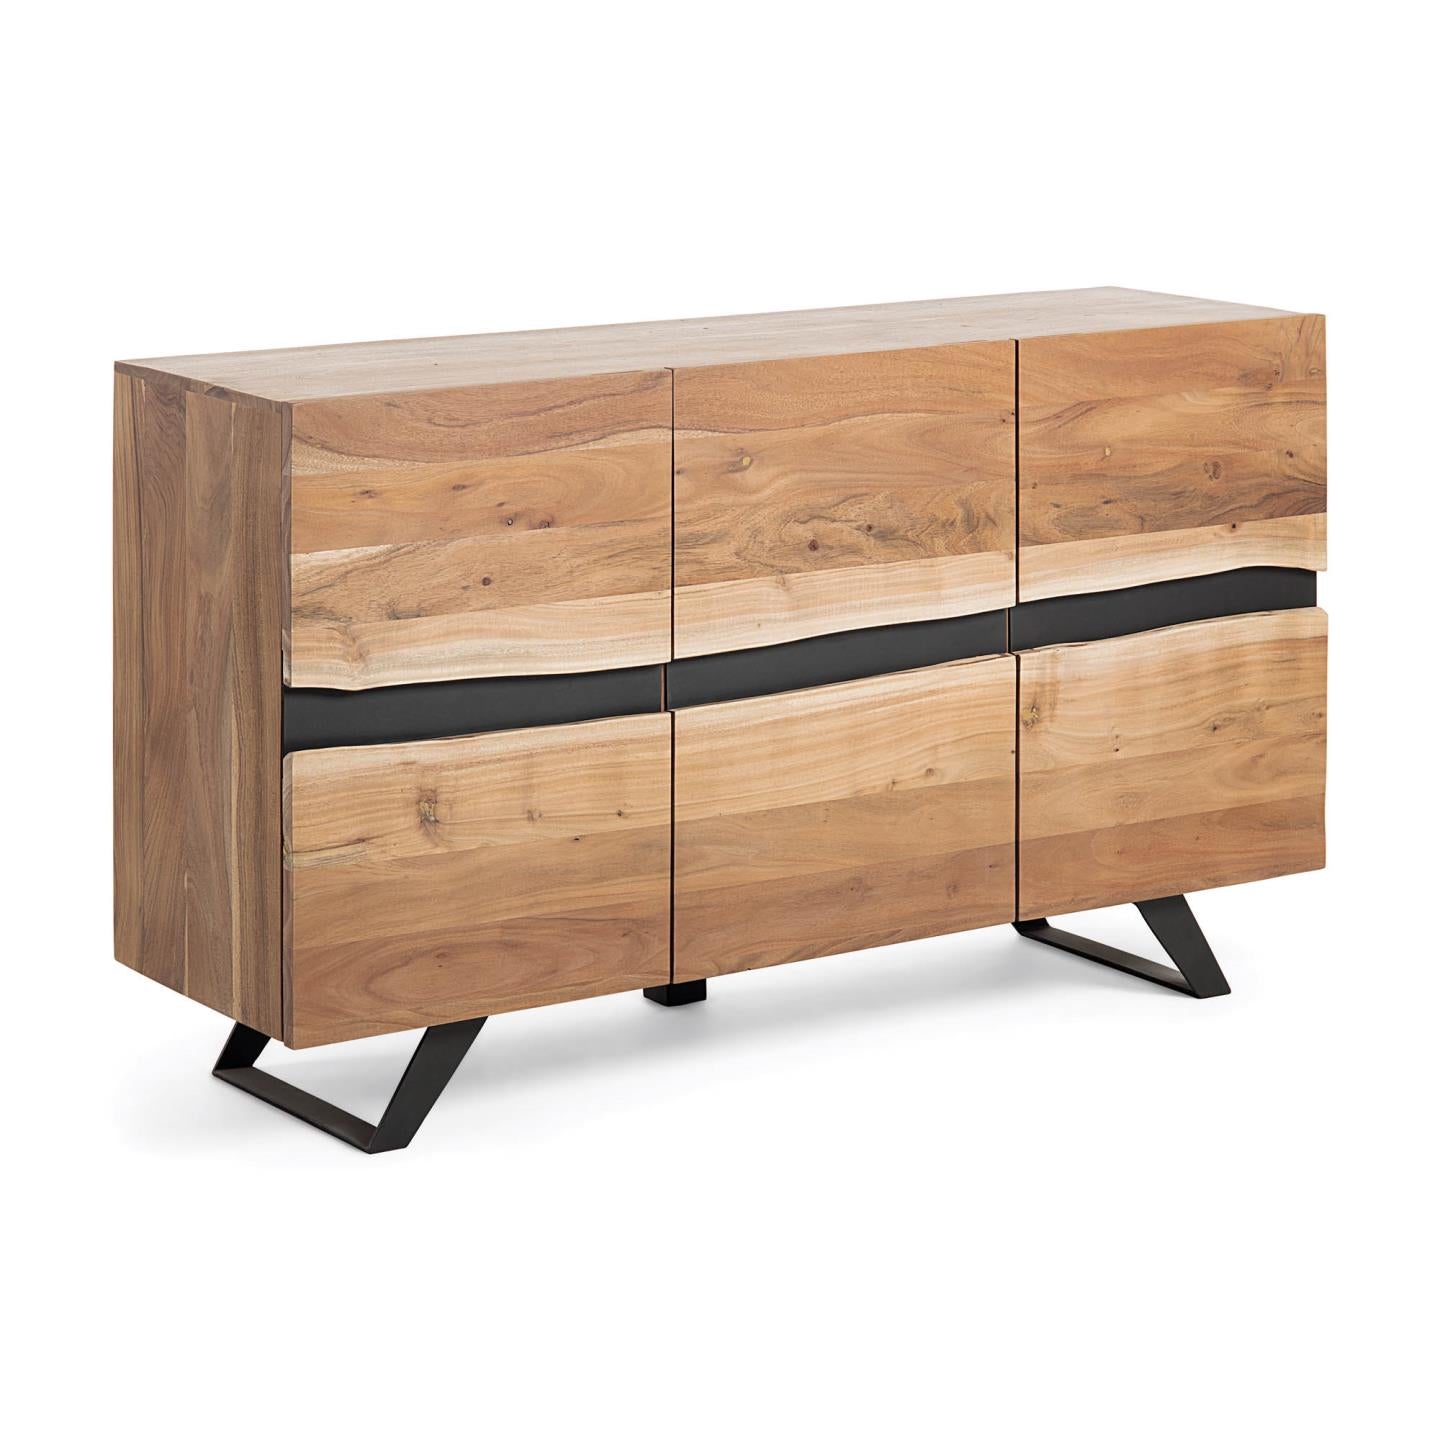 Uxia solid acacia wood sideboard with 3 doors and black finish steel, 148 x 85 cm